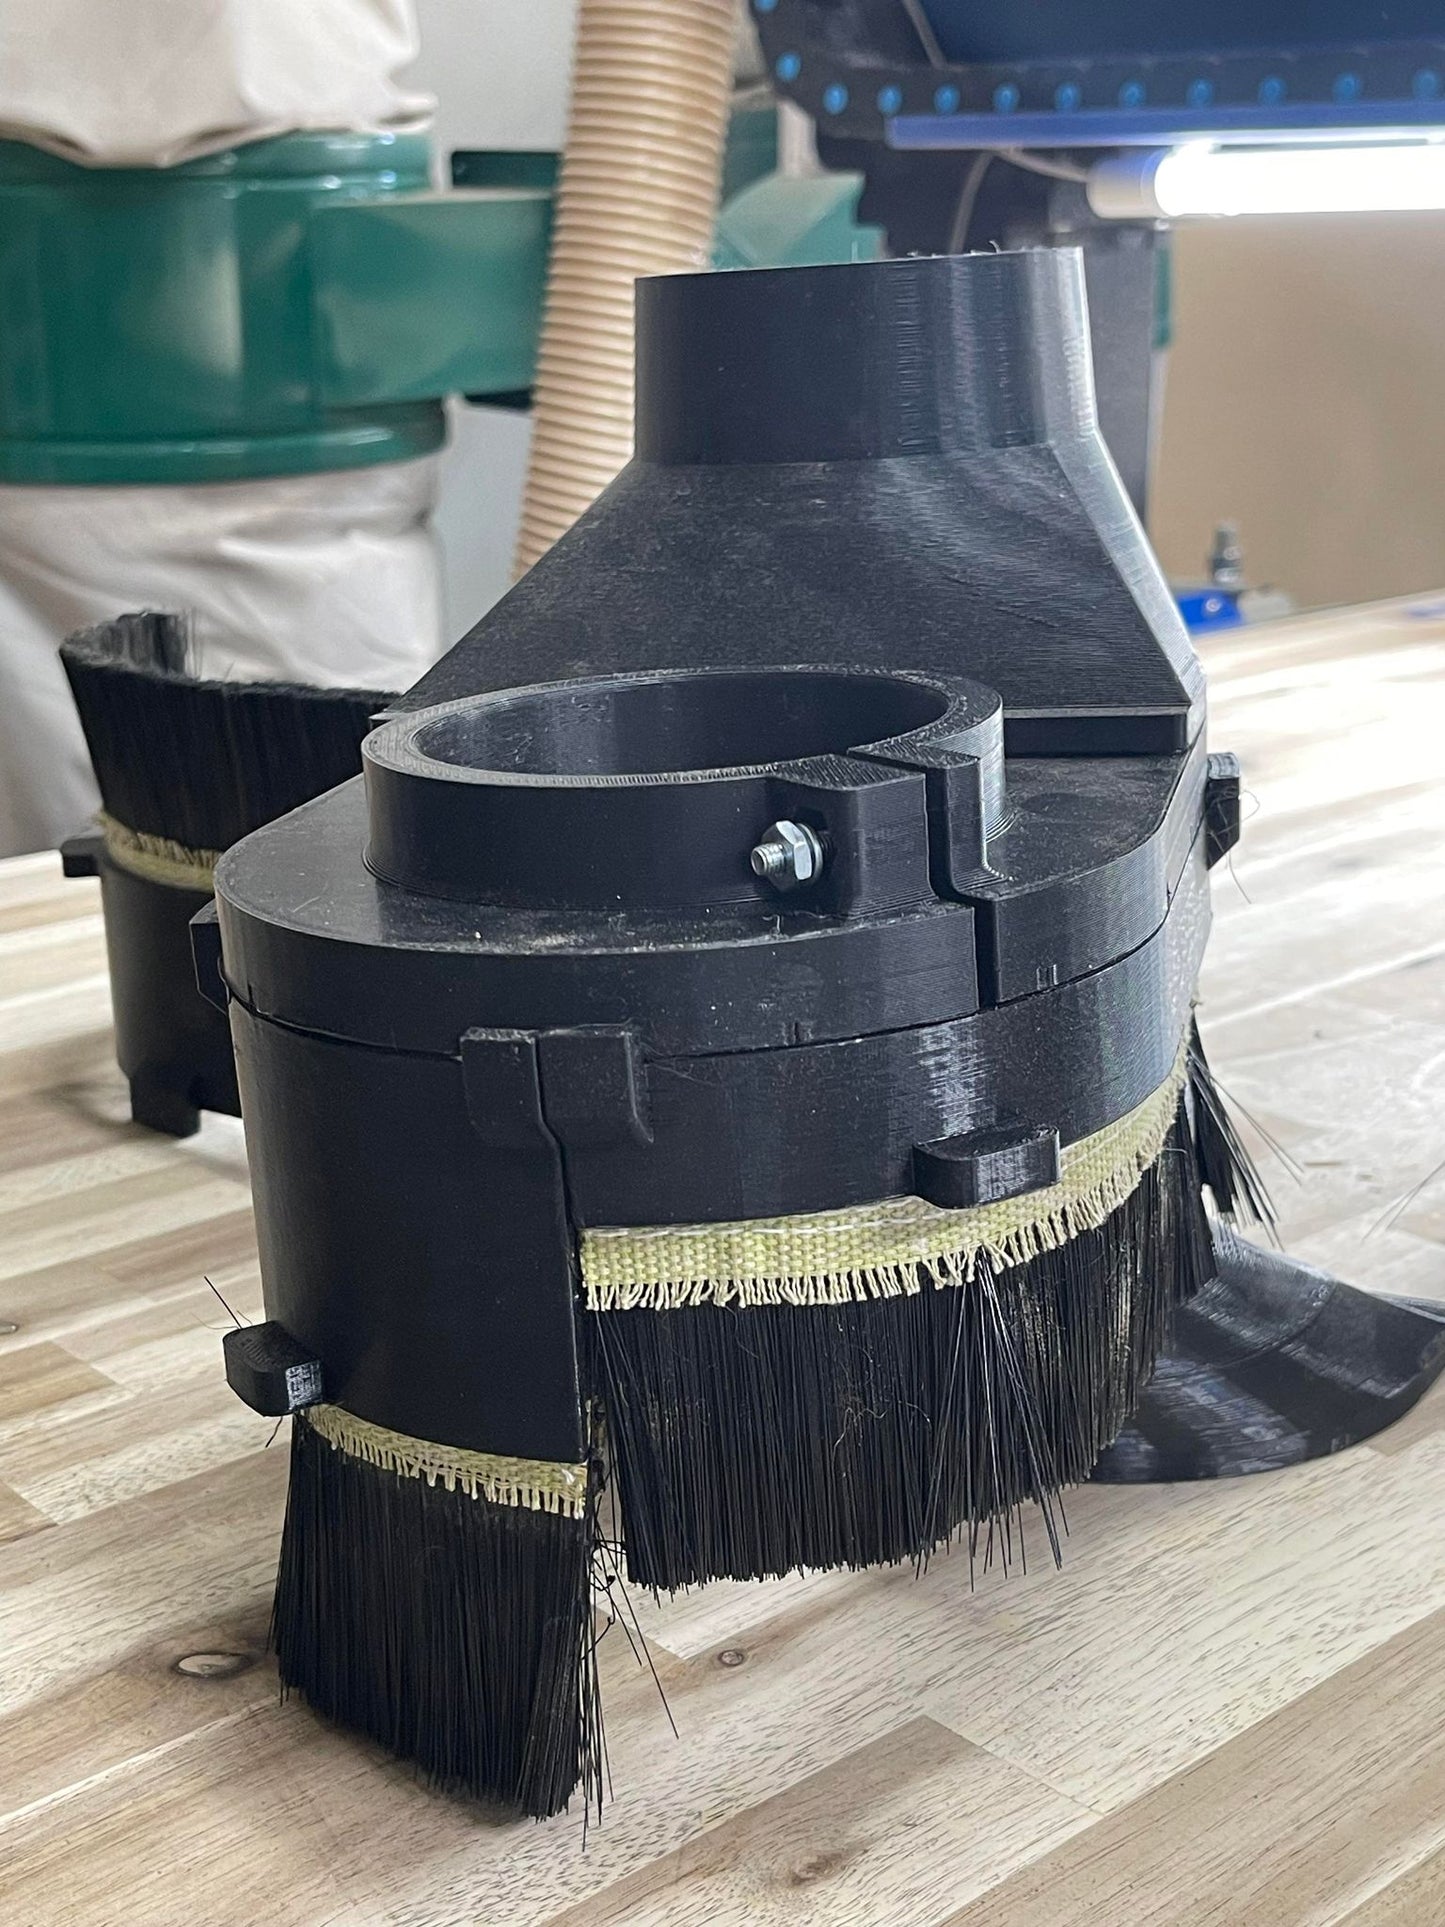 CNC Router Dust Shoe Boot with Brushes - Magnetic - Custom Made 3D Printed